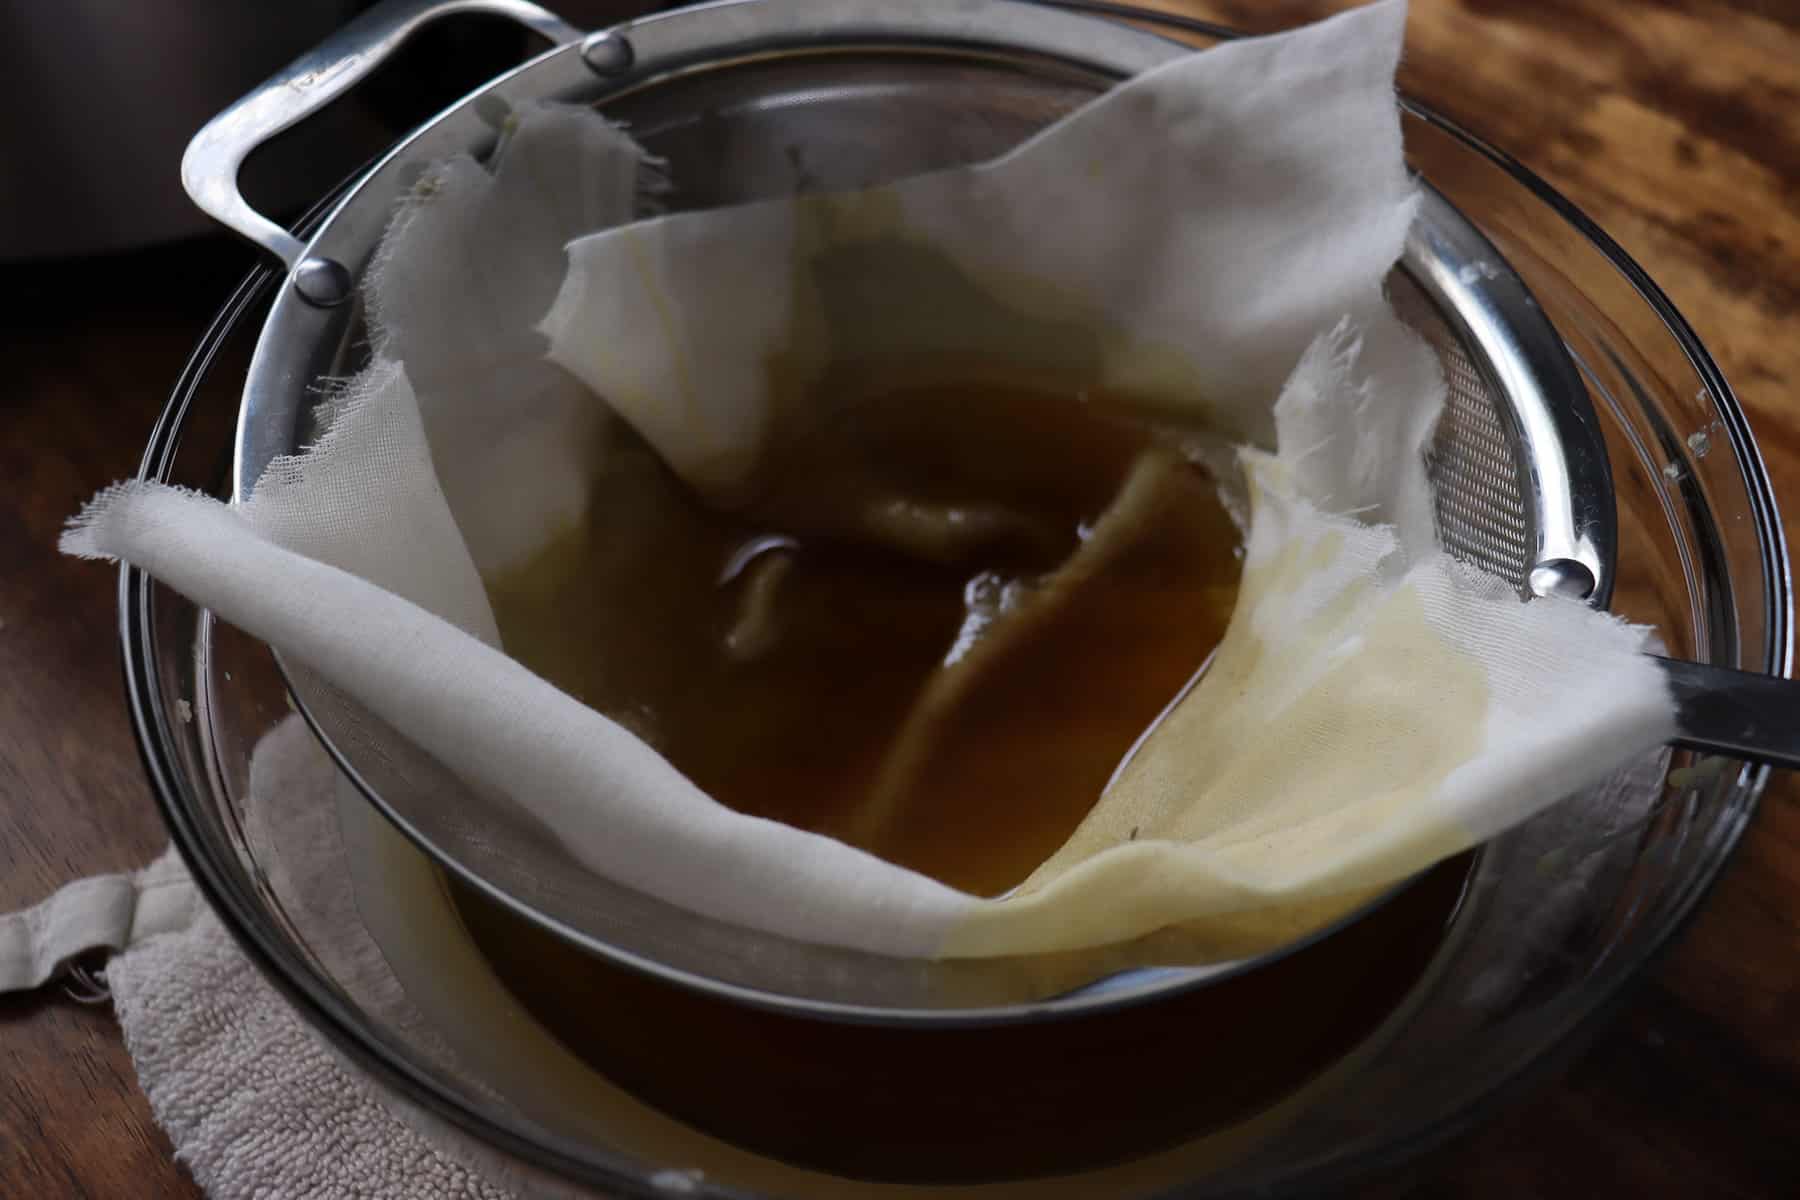 beeswax filtering through cheesecloth into a glass bowl